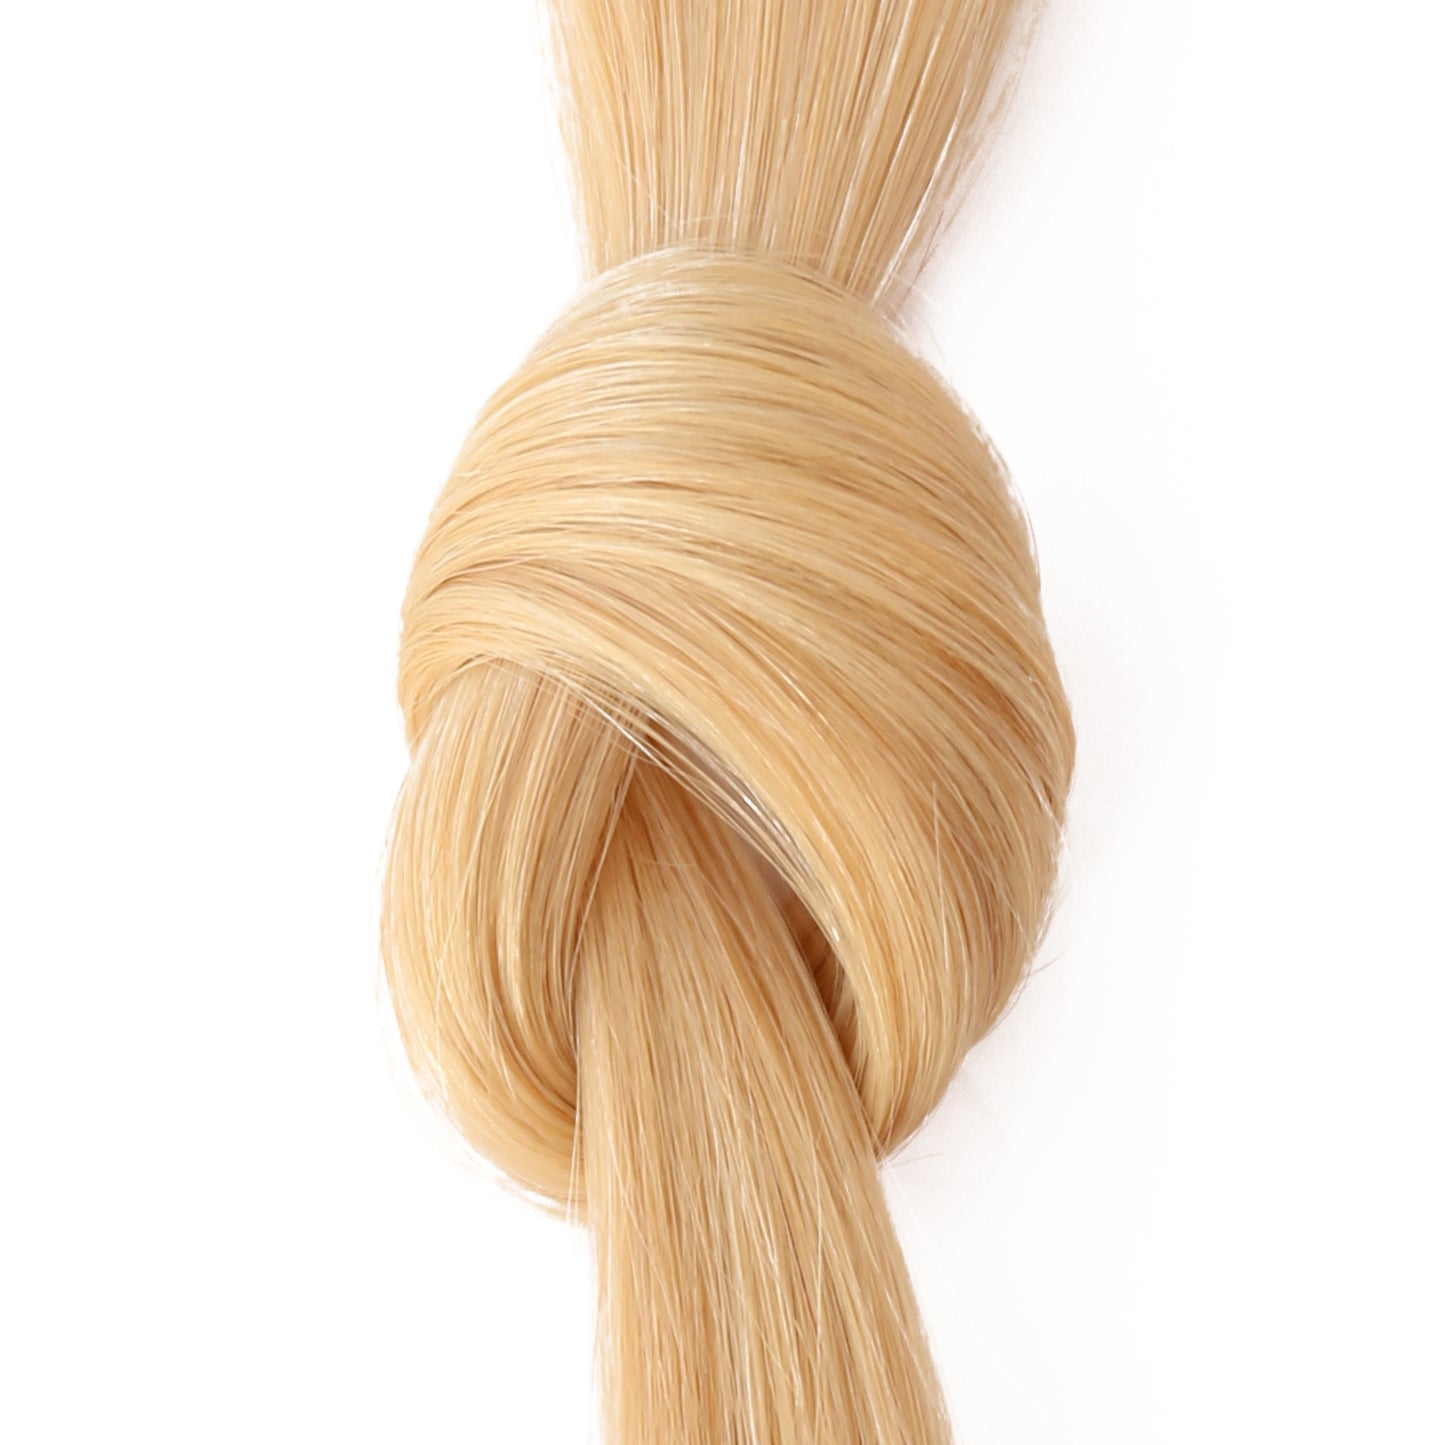 20 - Prime Tape In Golden Light Blonde - True chromatic and universally rich shades of natural color.